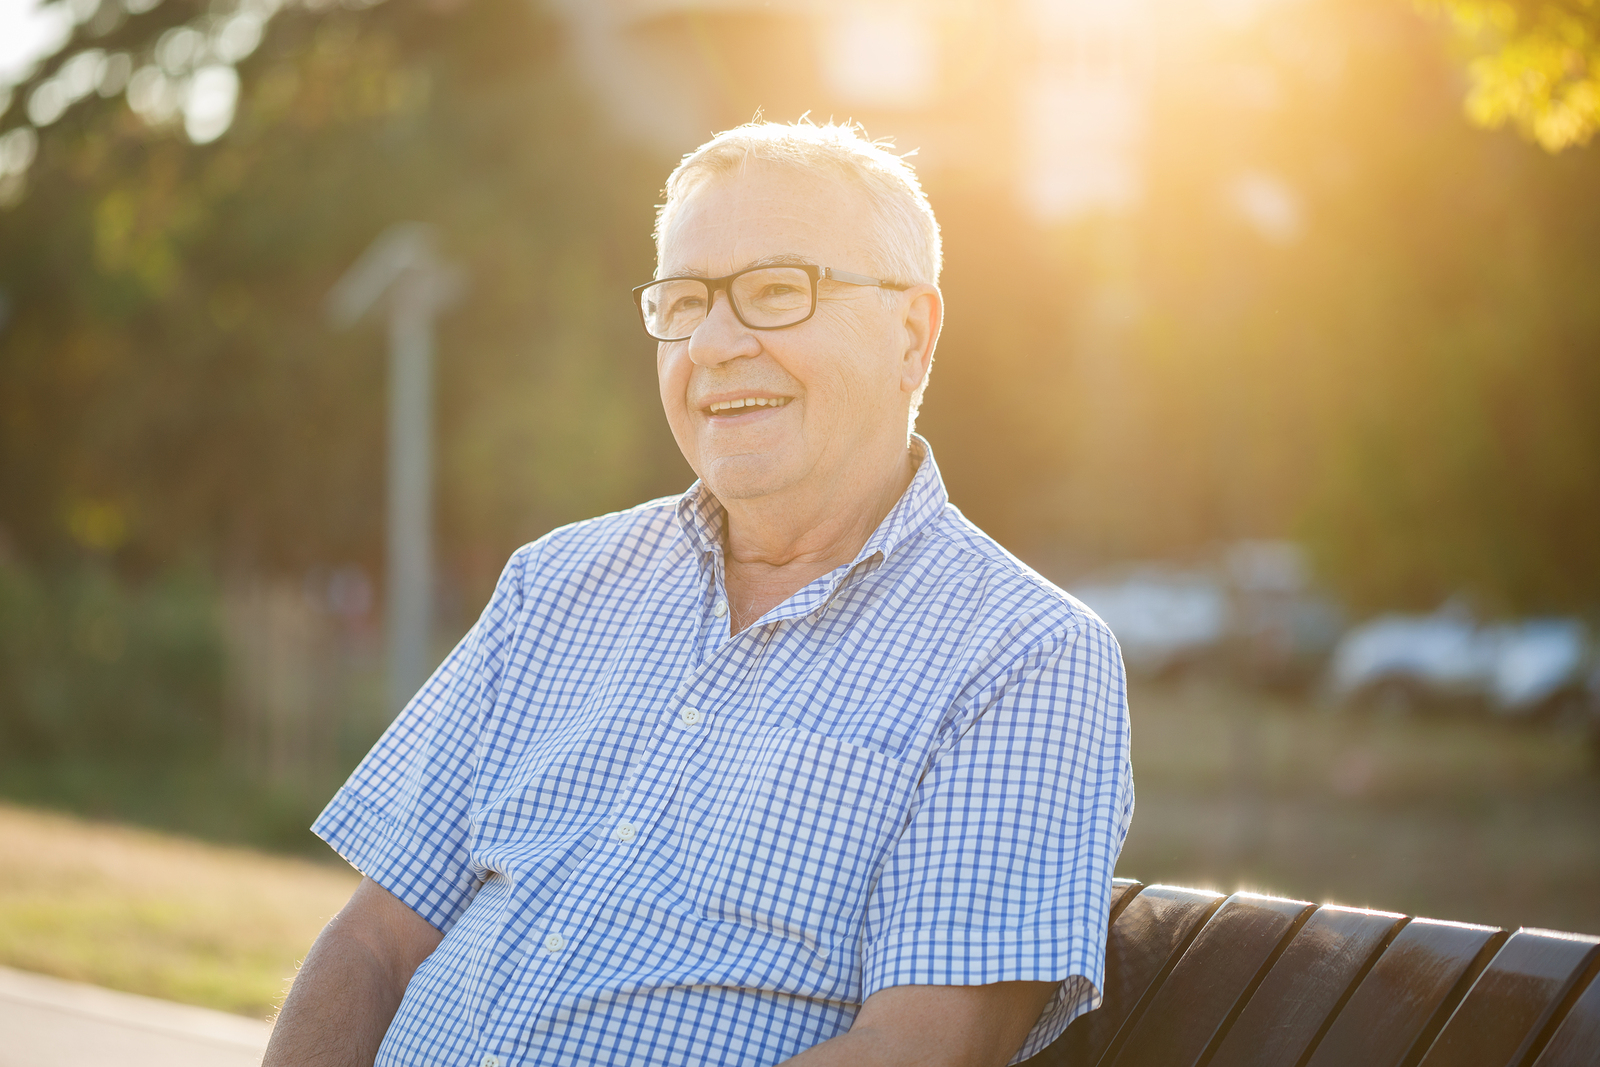 Outdoor portrait of happy senior man who is looking into distance.